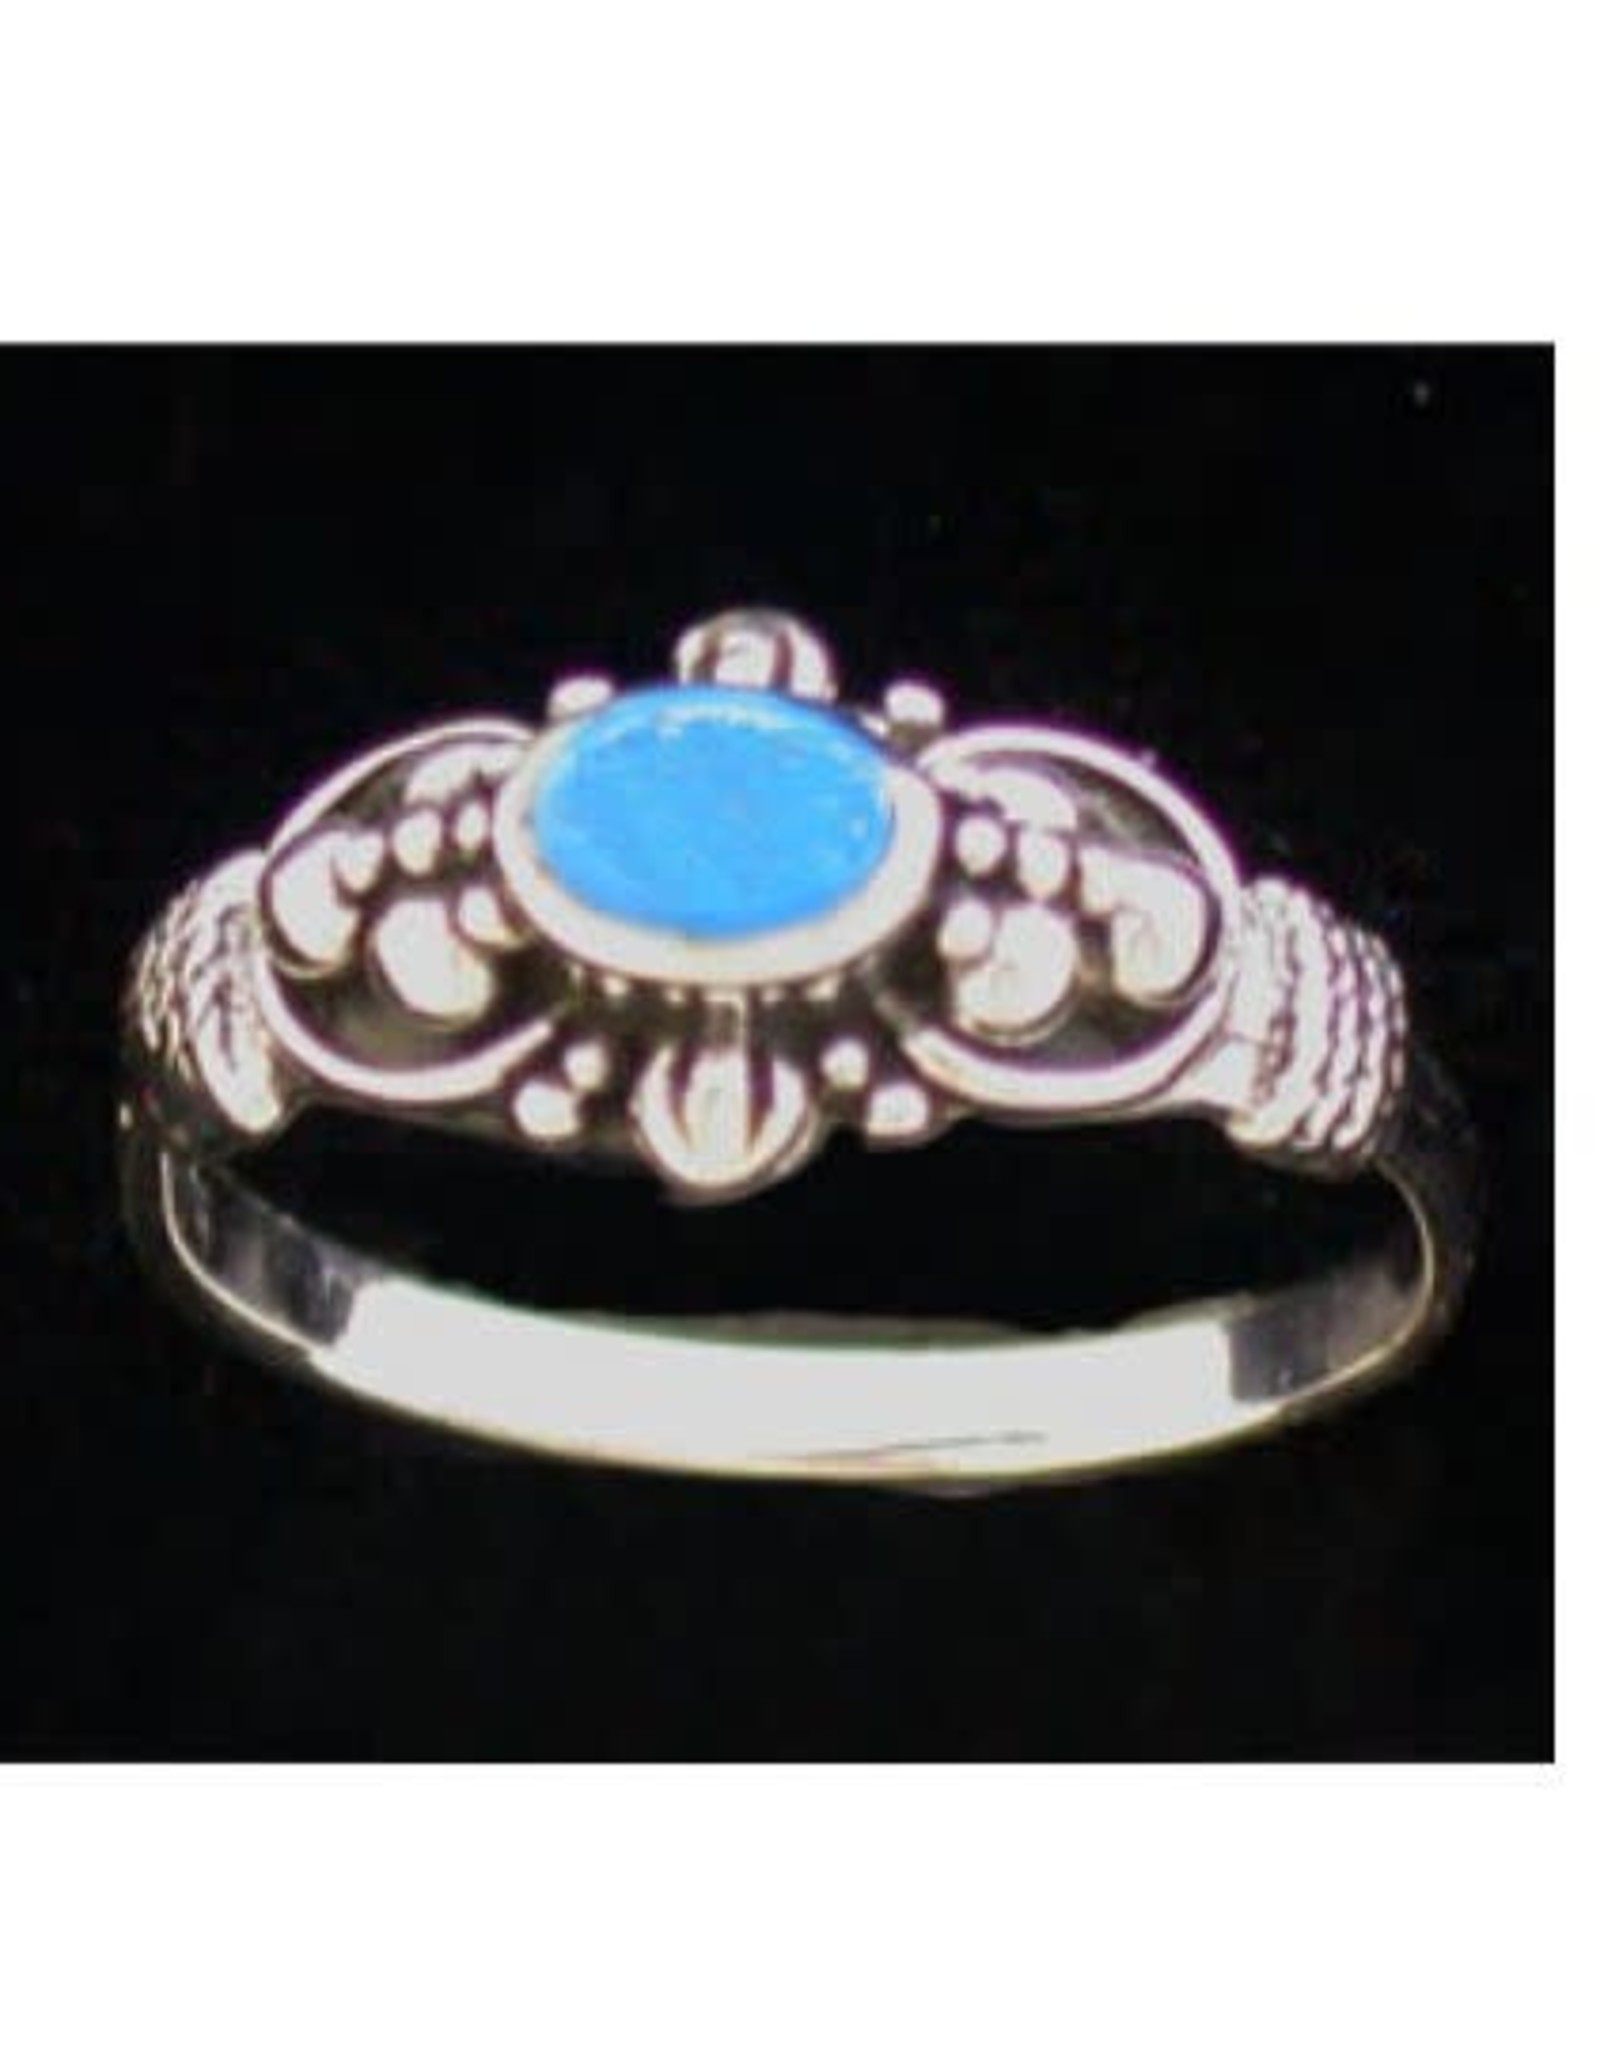 Turquoise Bezel Ring Sterling Silver - Size 4